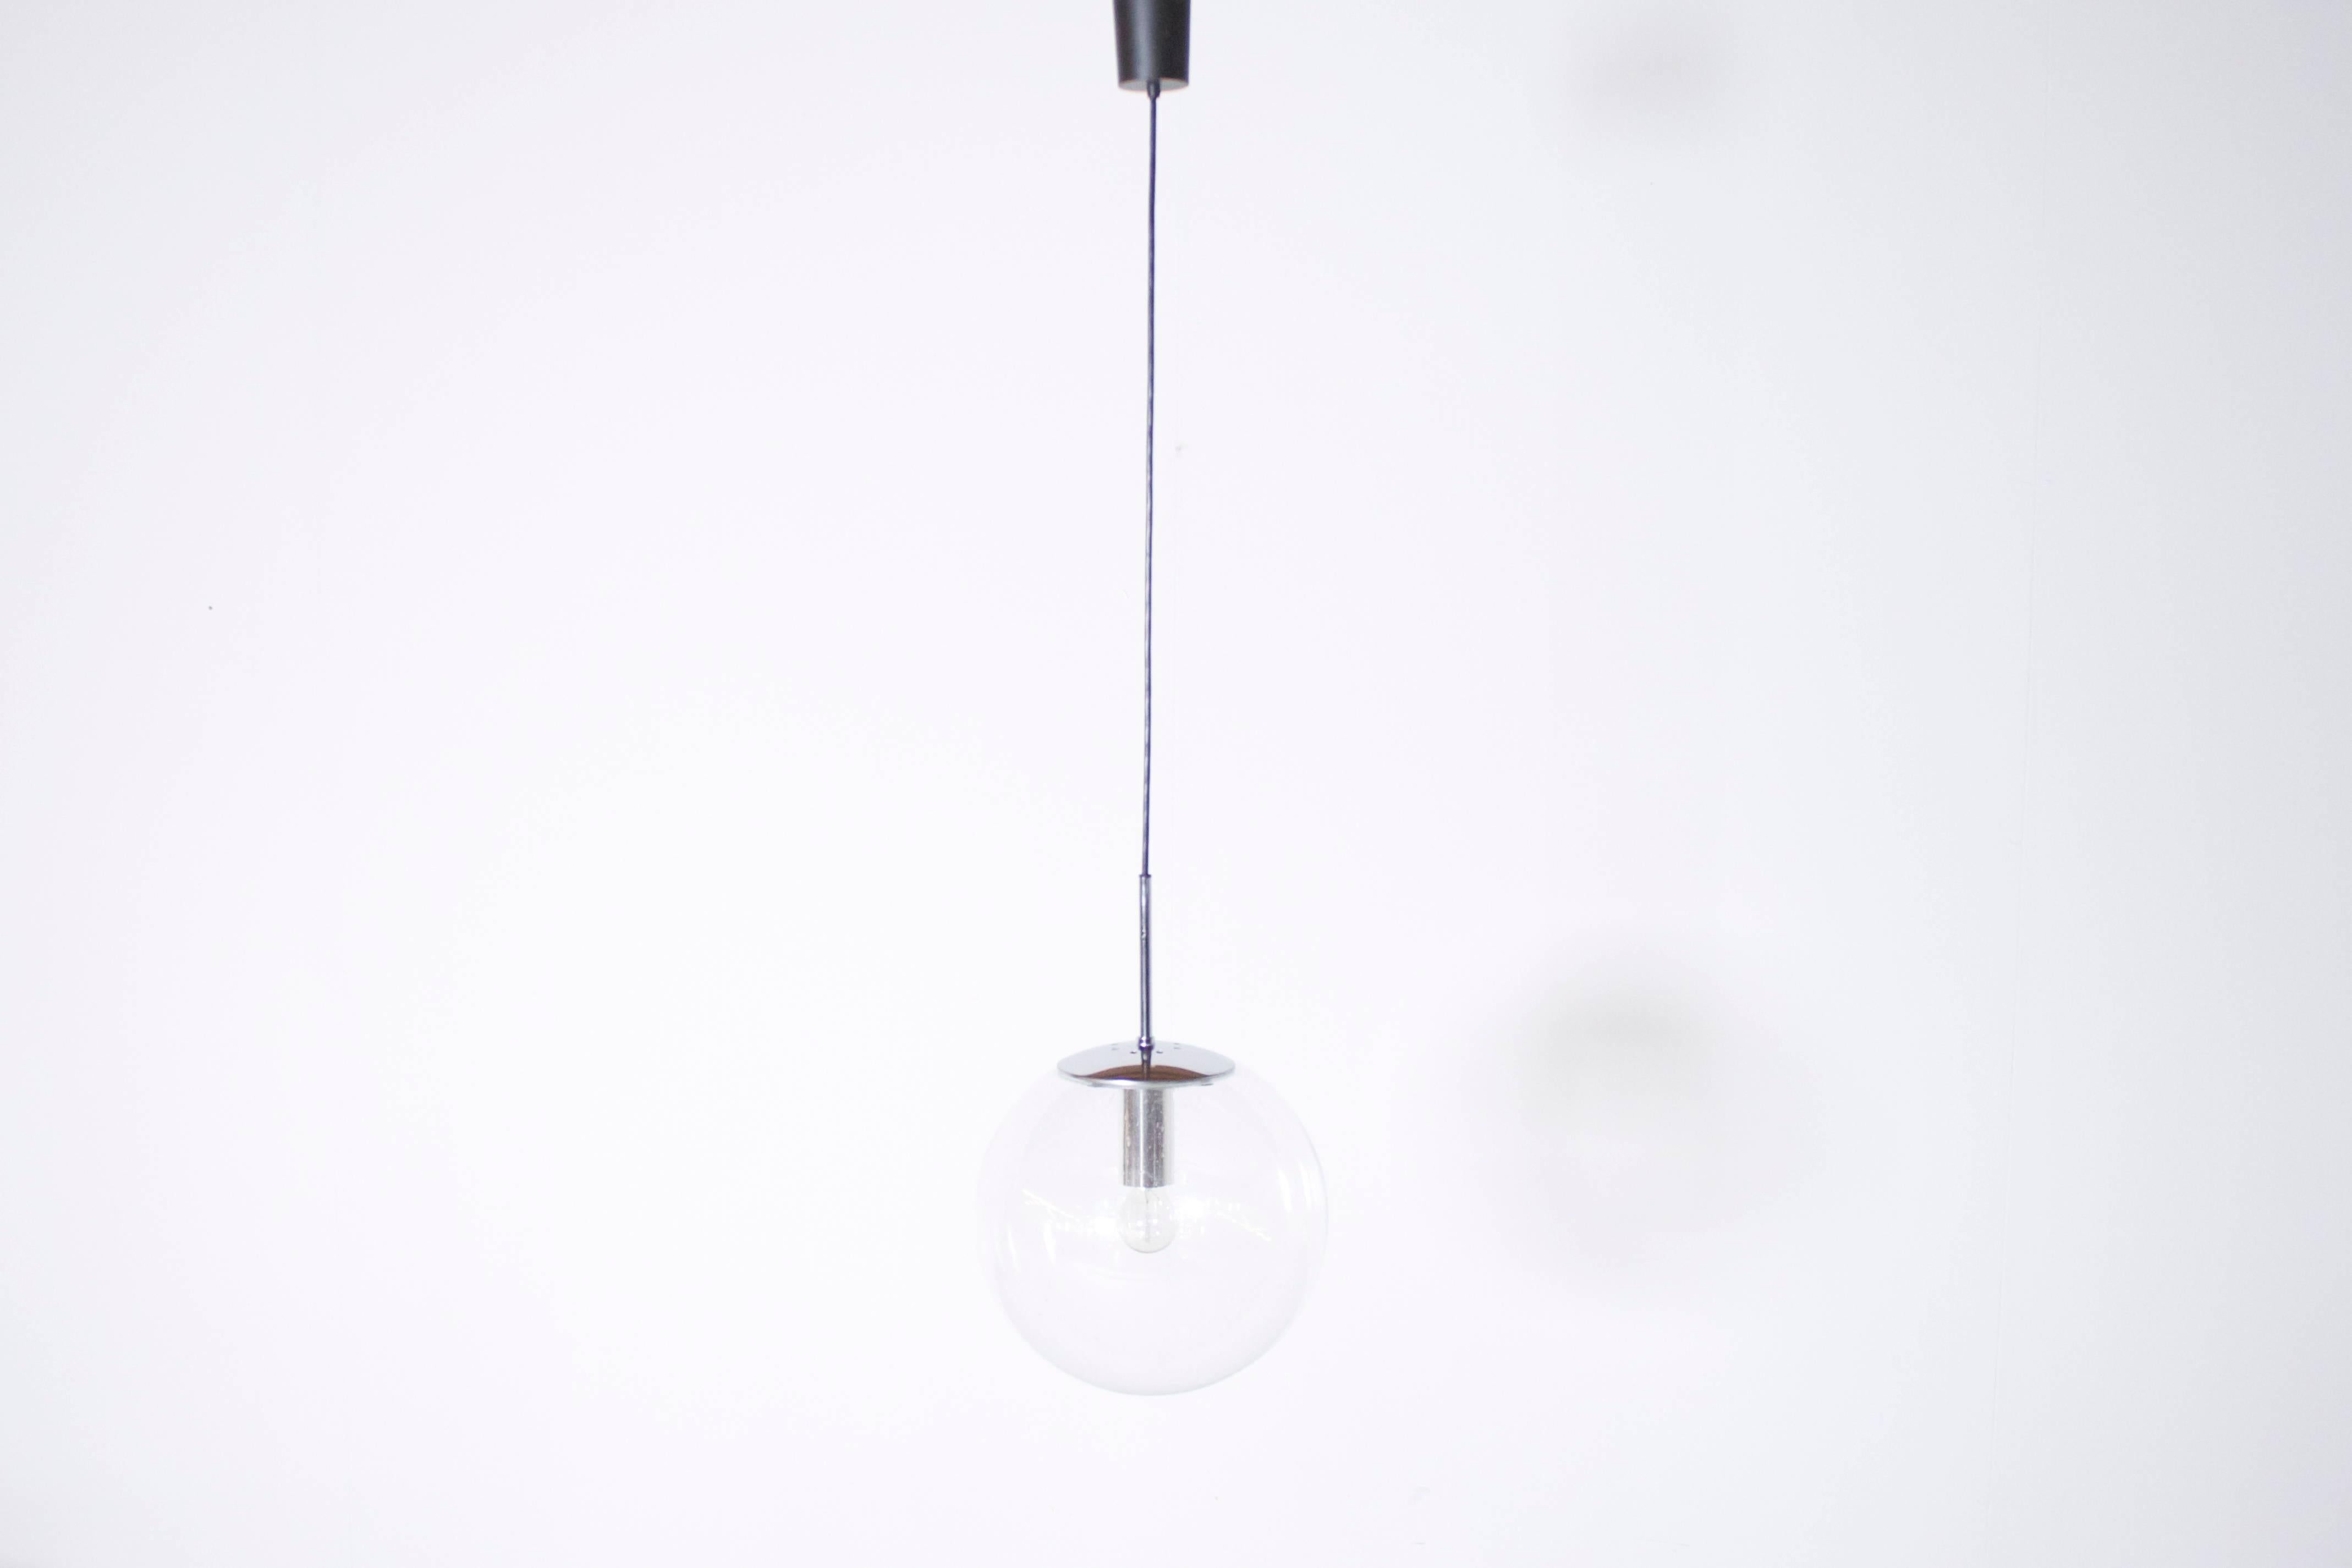 Large Glashütte Limburg pendants in beautiful condition. 

Chromed hardware. 

Handblown transparent bubbled glass globes which create a wonderful light effect.

Black cord and original canopy. 

The length of the cord can be customized for